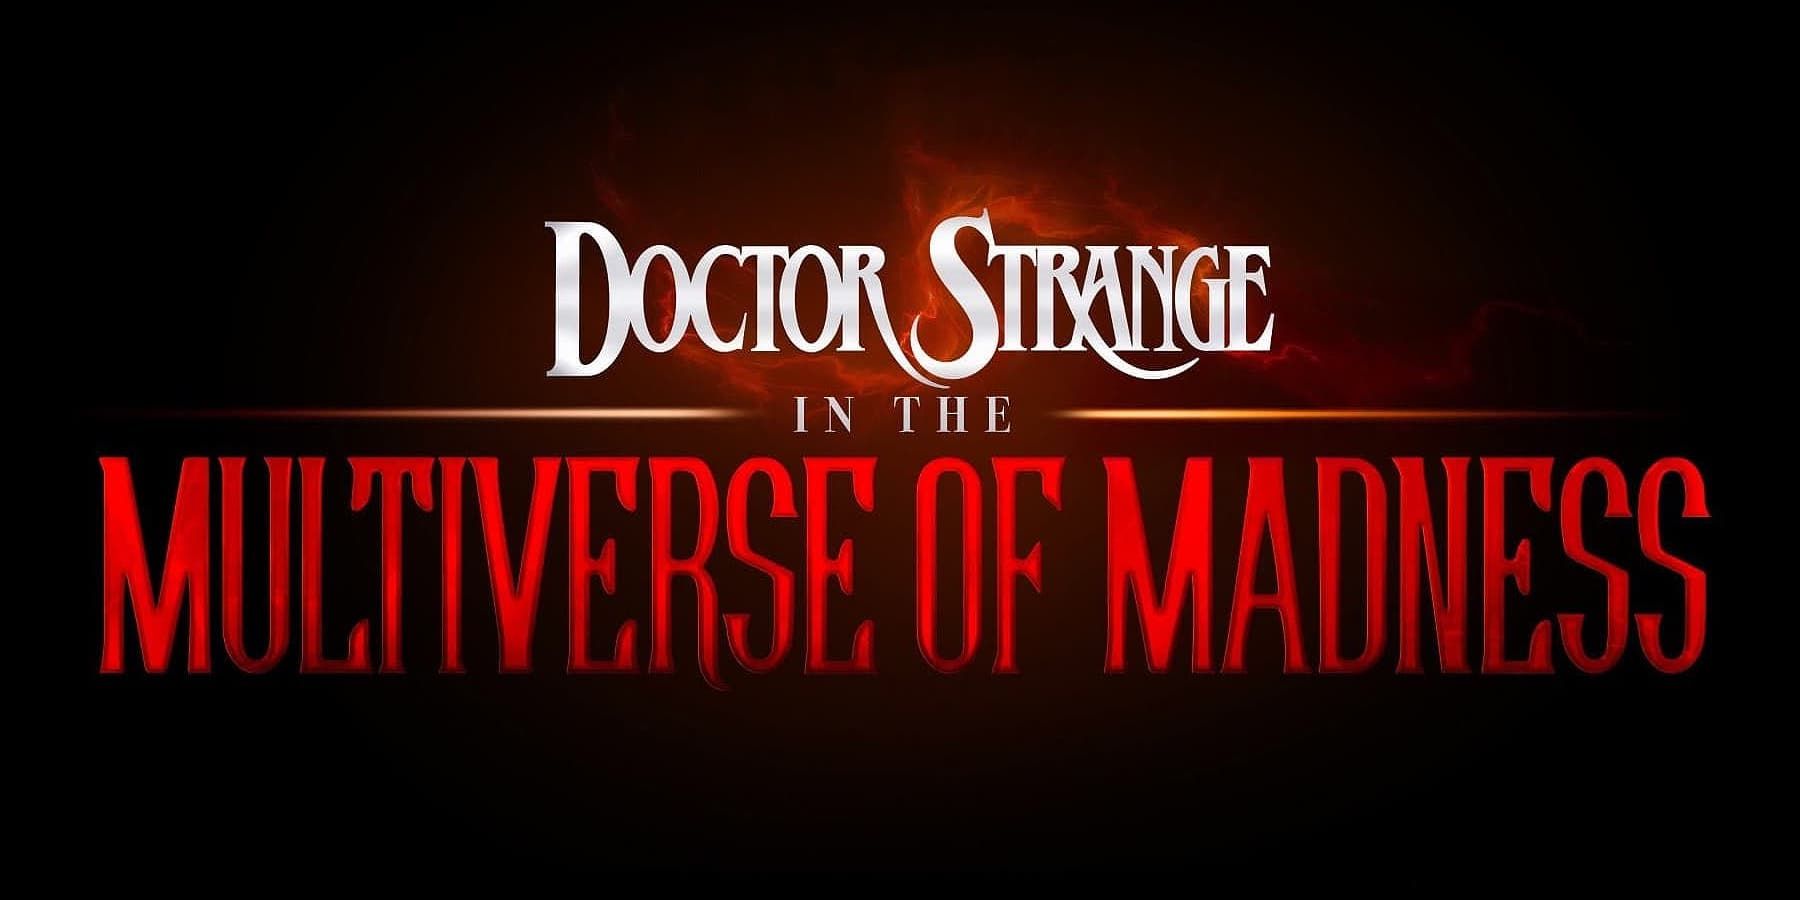 Doctor Strange in the Multiverse of Madness - What We Know So Far